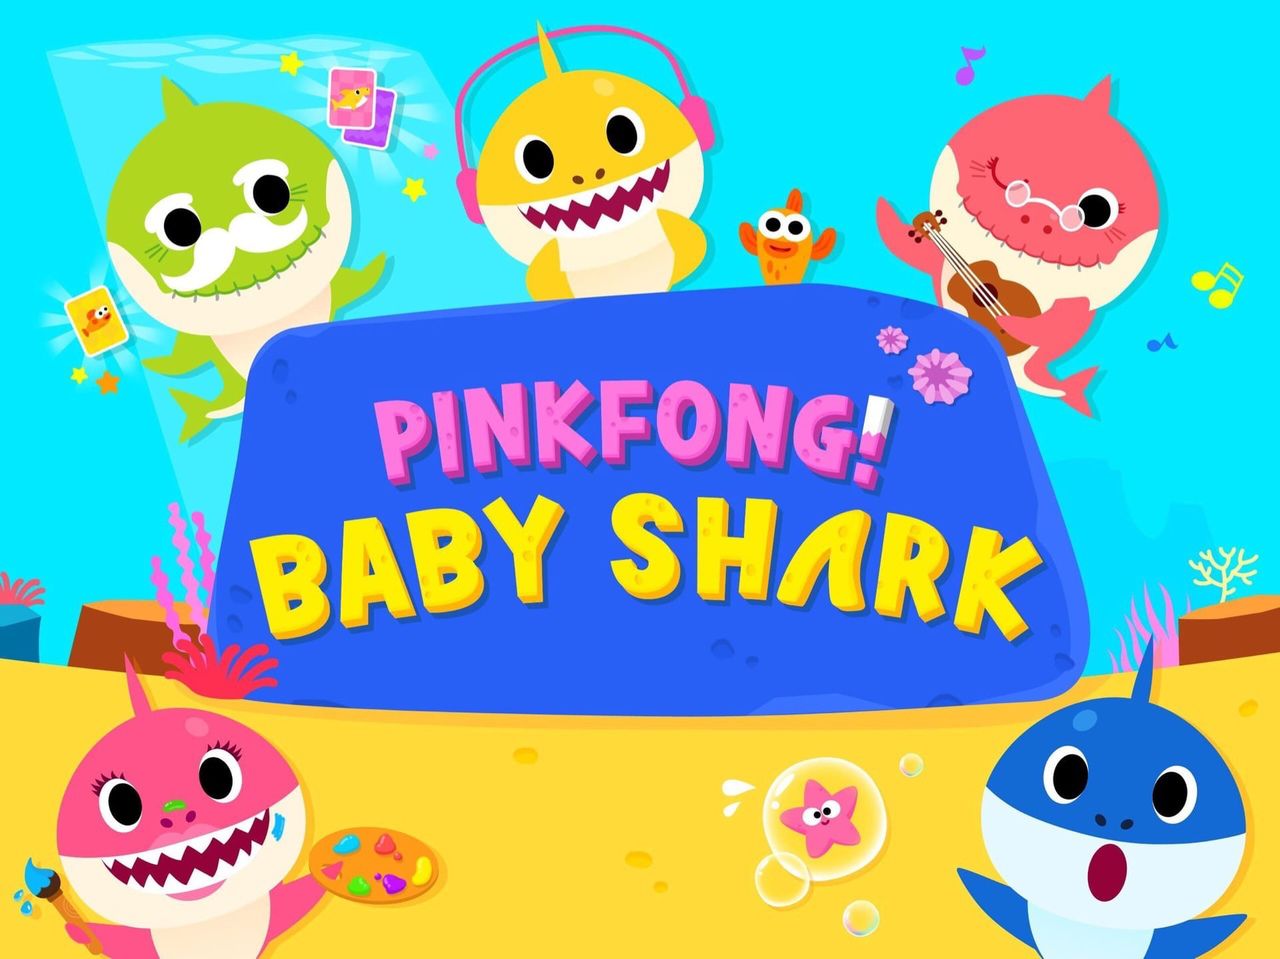 Pinkfong - Baby Shark (InVoice Remix)